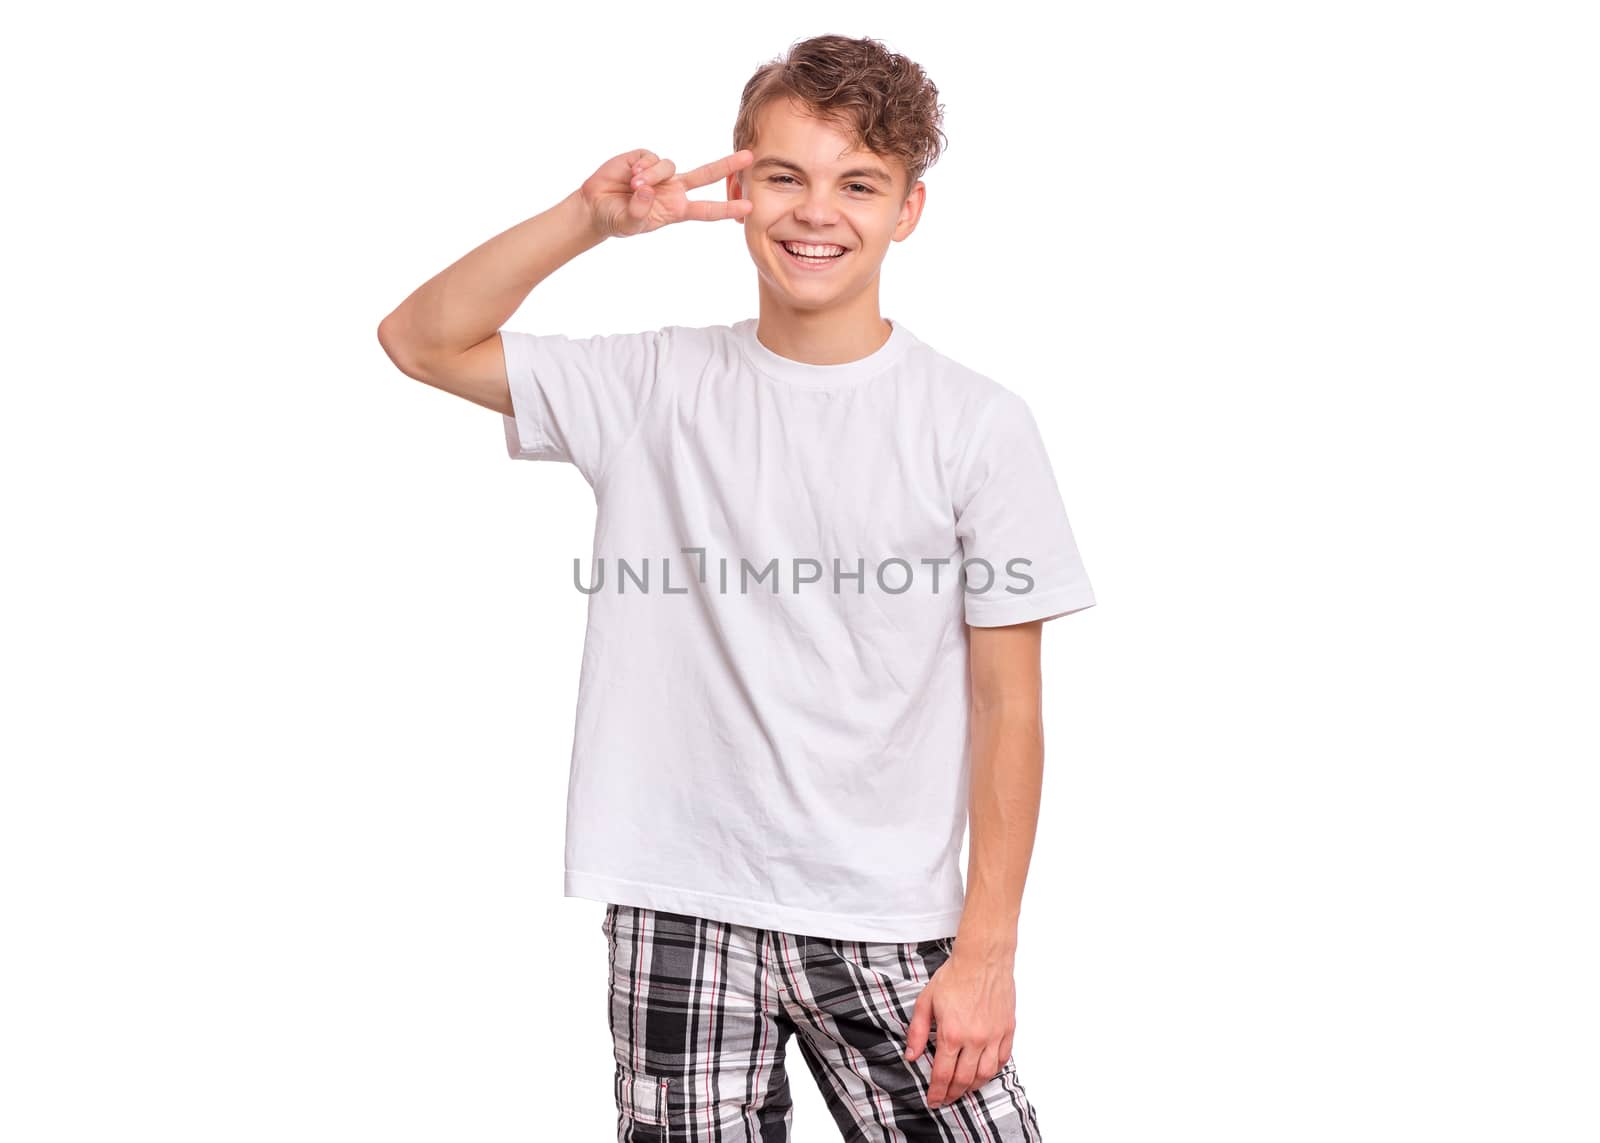 Handsome teen boy laughing looking very happy, isolated on white background